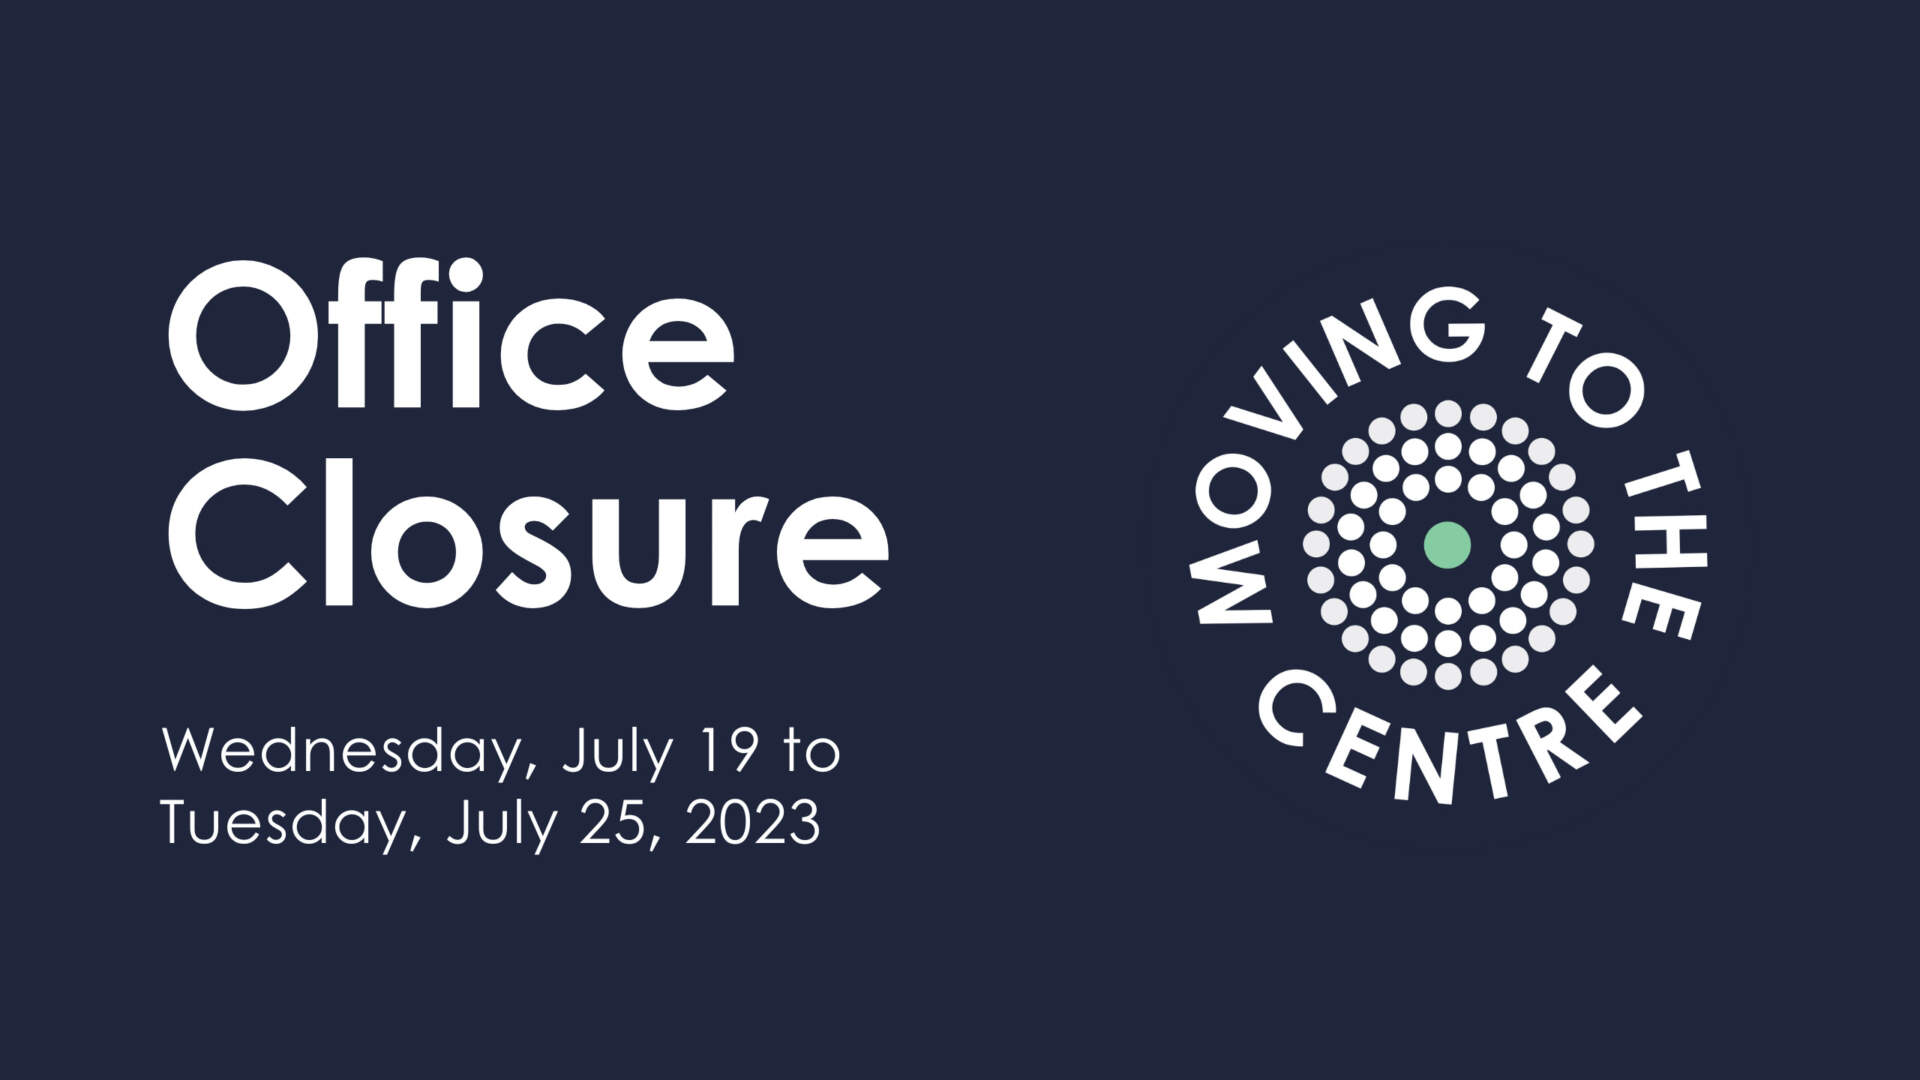 Dark background with "Moving to the Centre" logo and text that says "Office Closure Wednesday, July 19 to Tuesday, July 25, 2023"